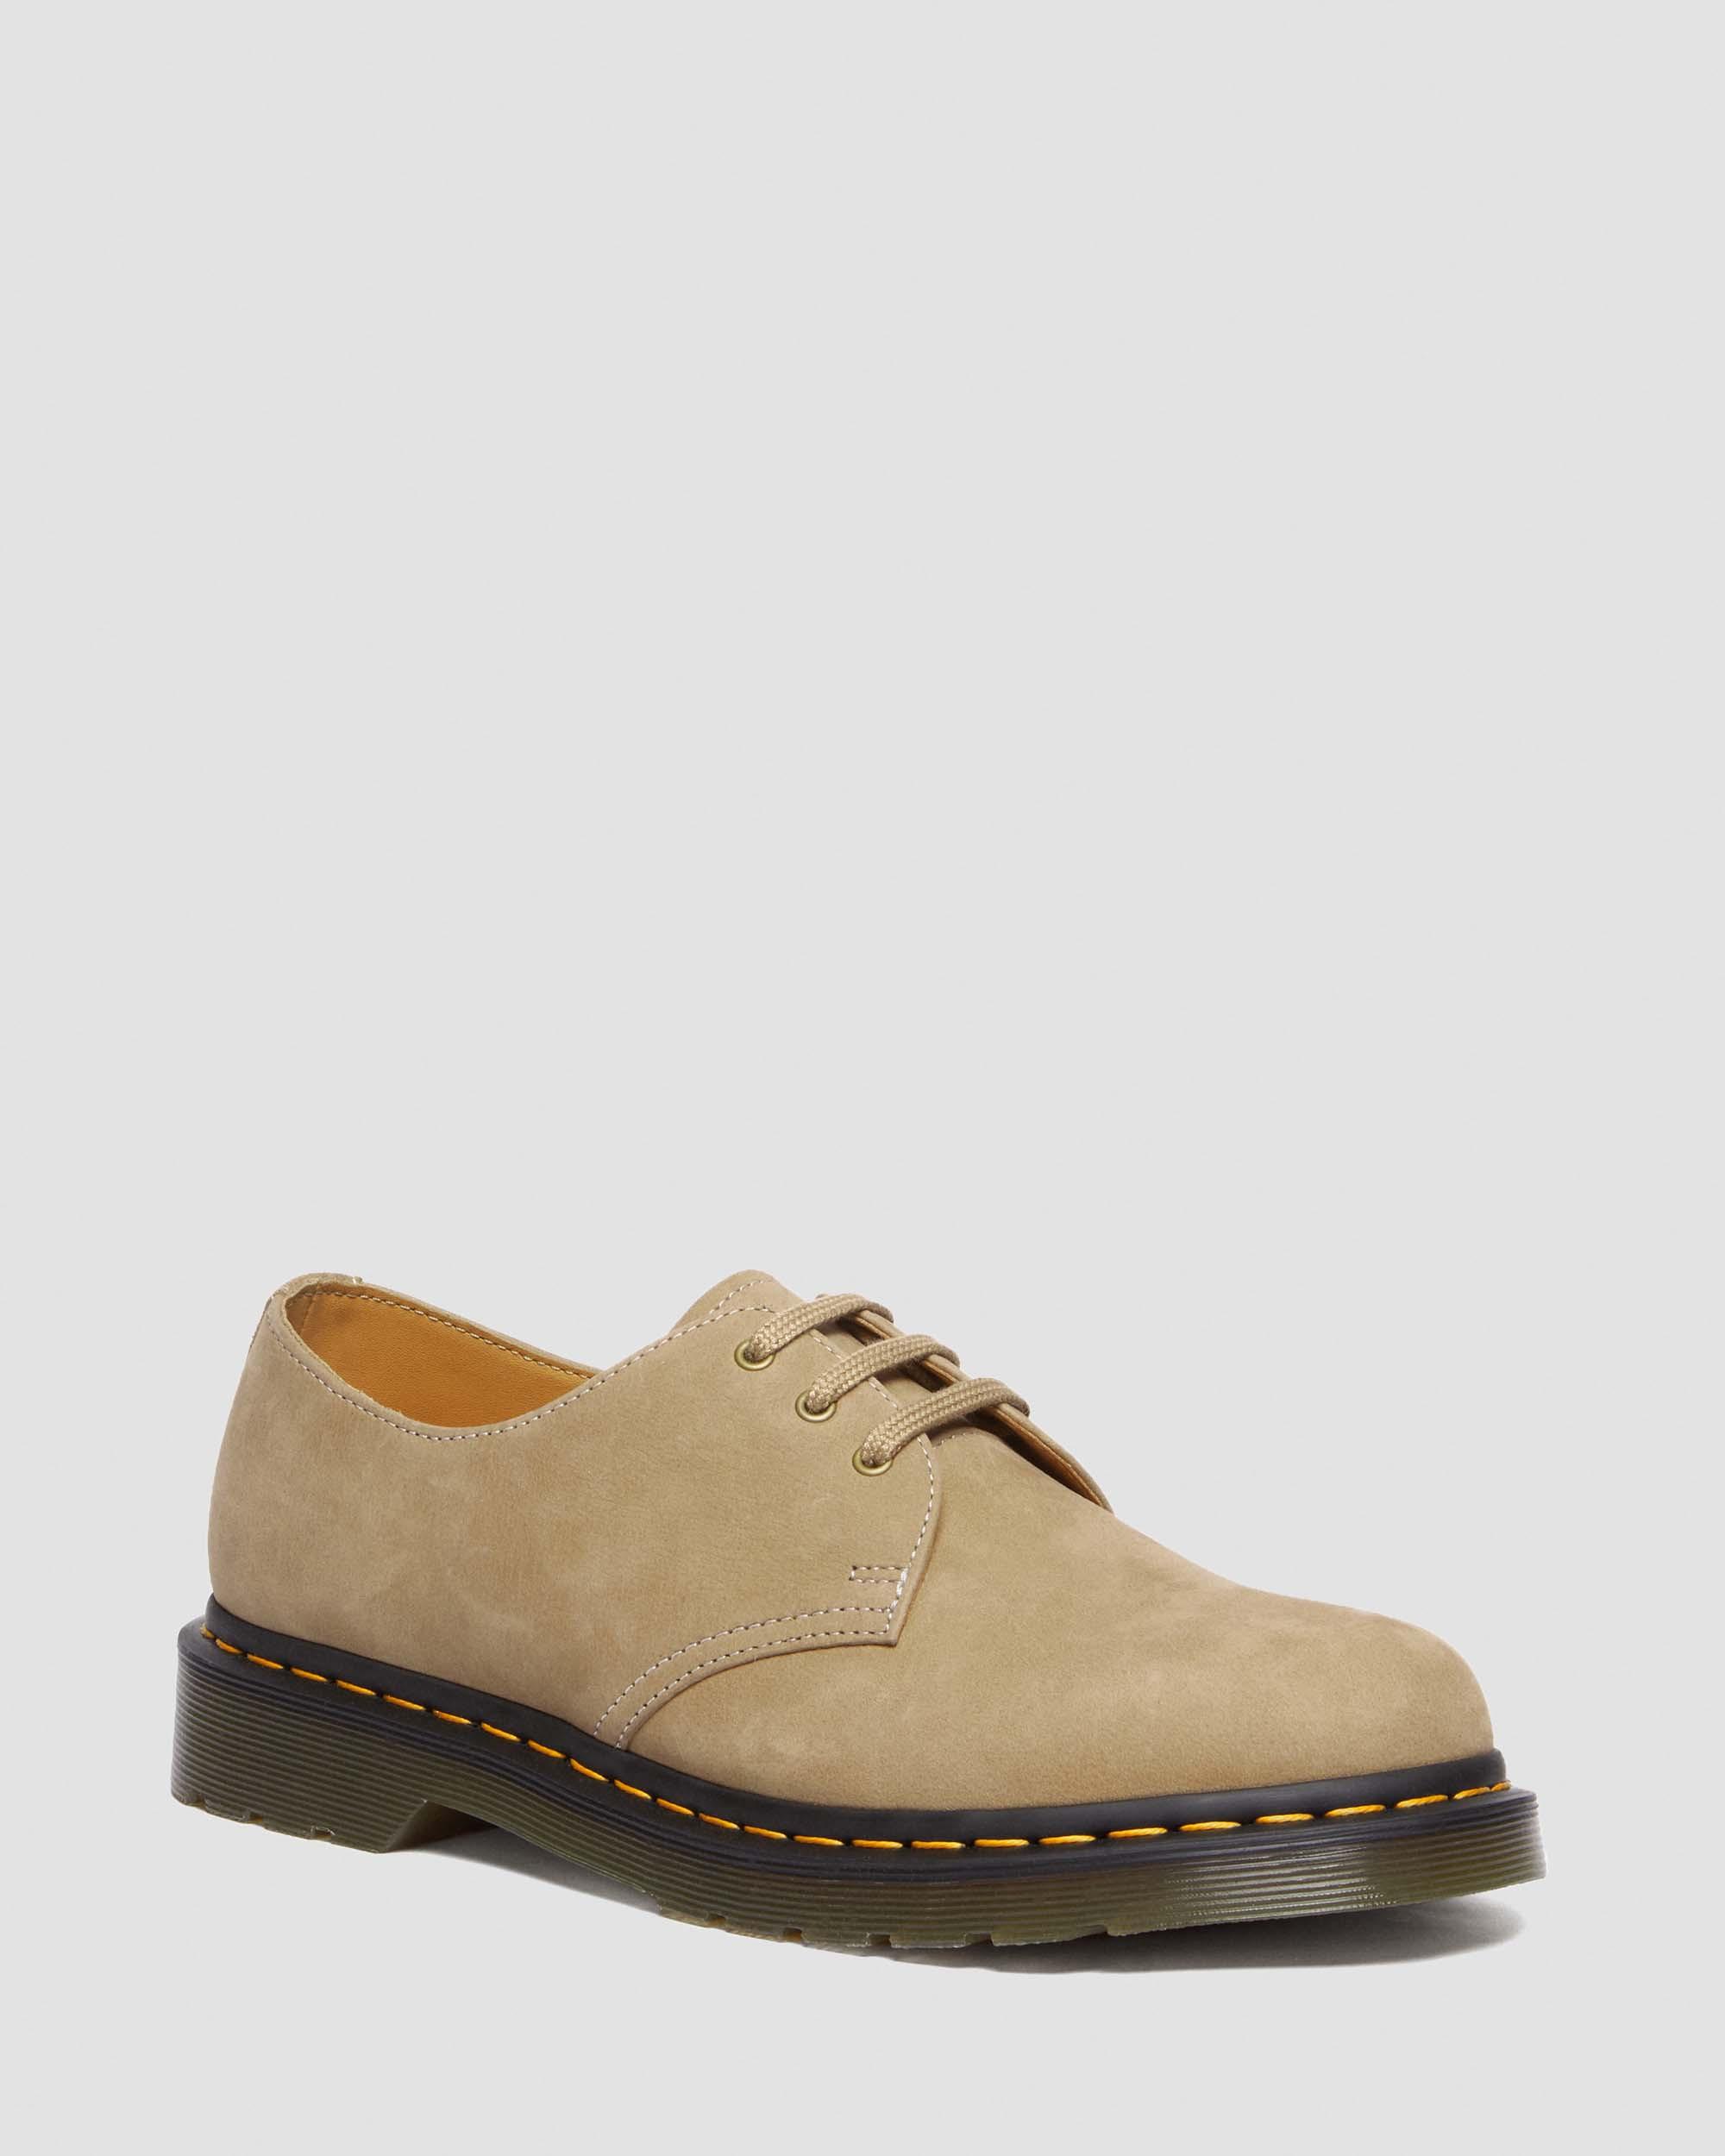 Dr. Martens' 1461 Tumbled Nubuck Leather Oxford Shoes In Bräunen/braun